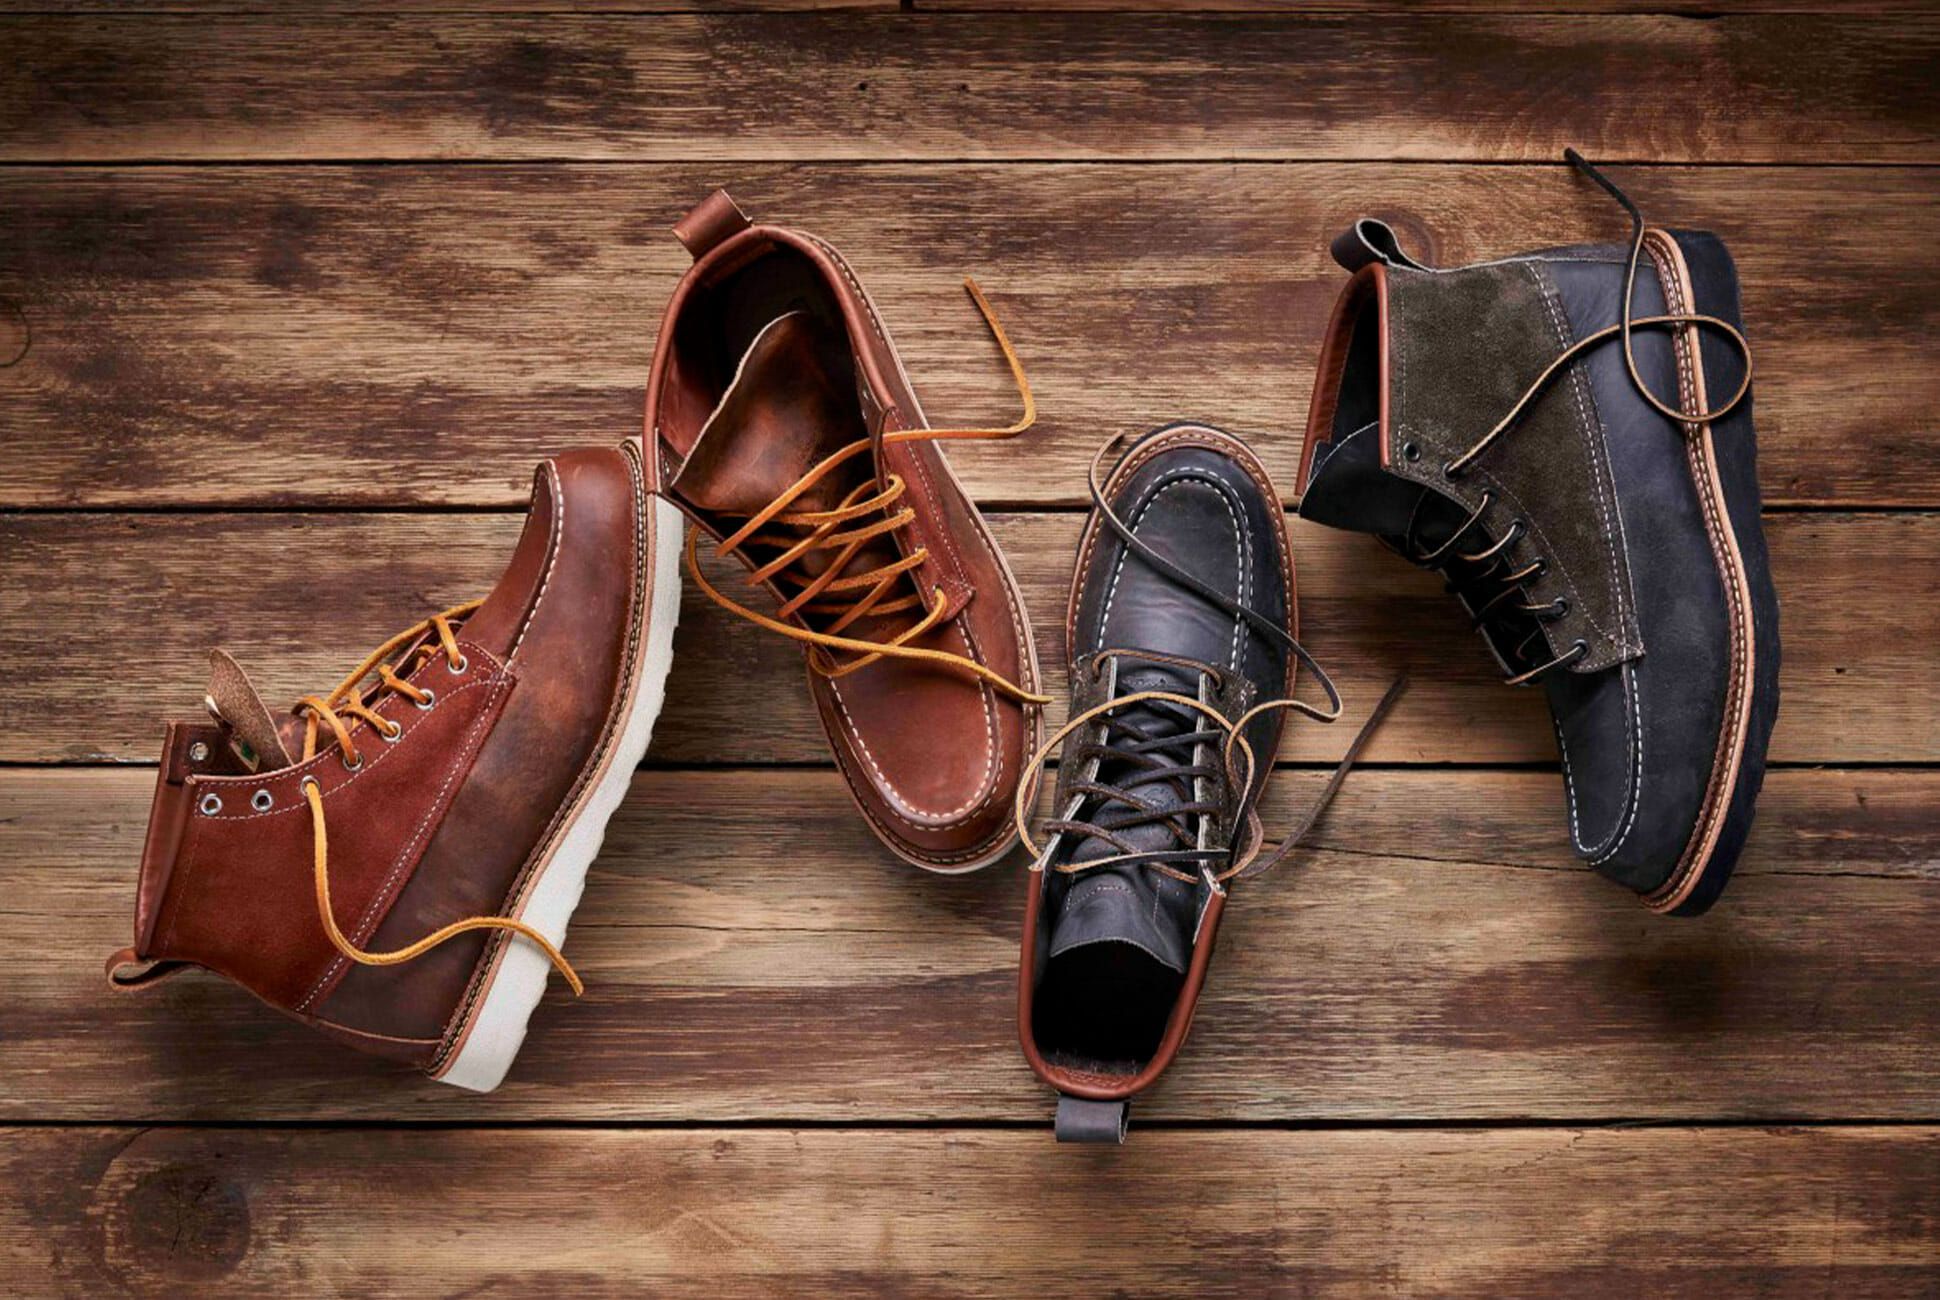 The Most Interesting Red Wing Boot Collabs You Can Buy